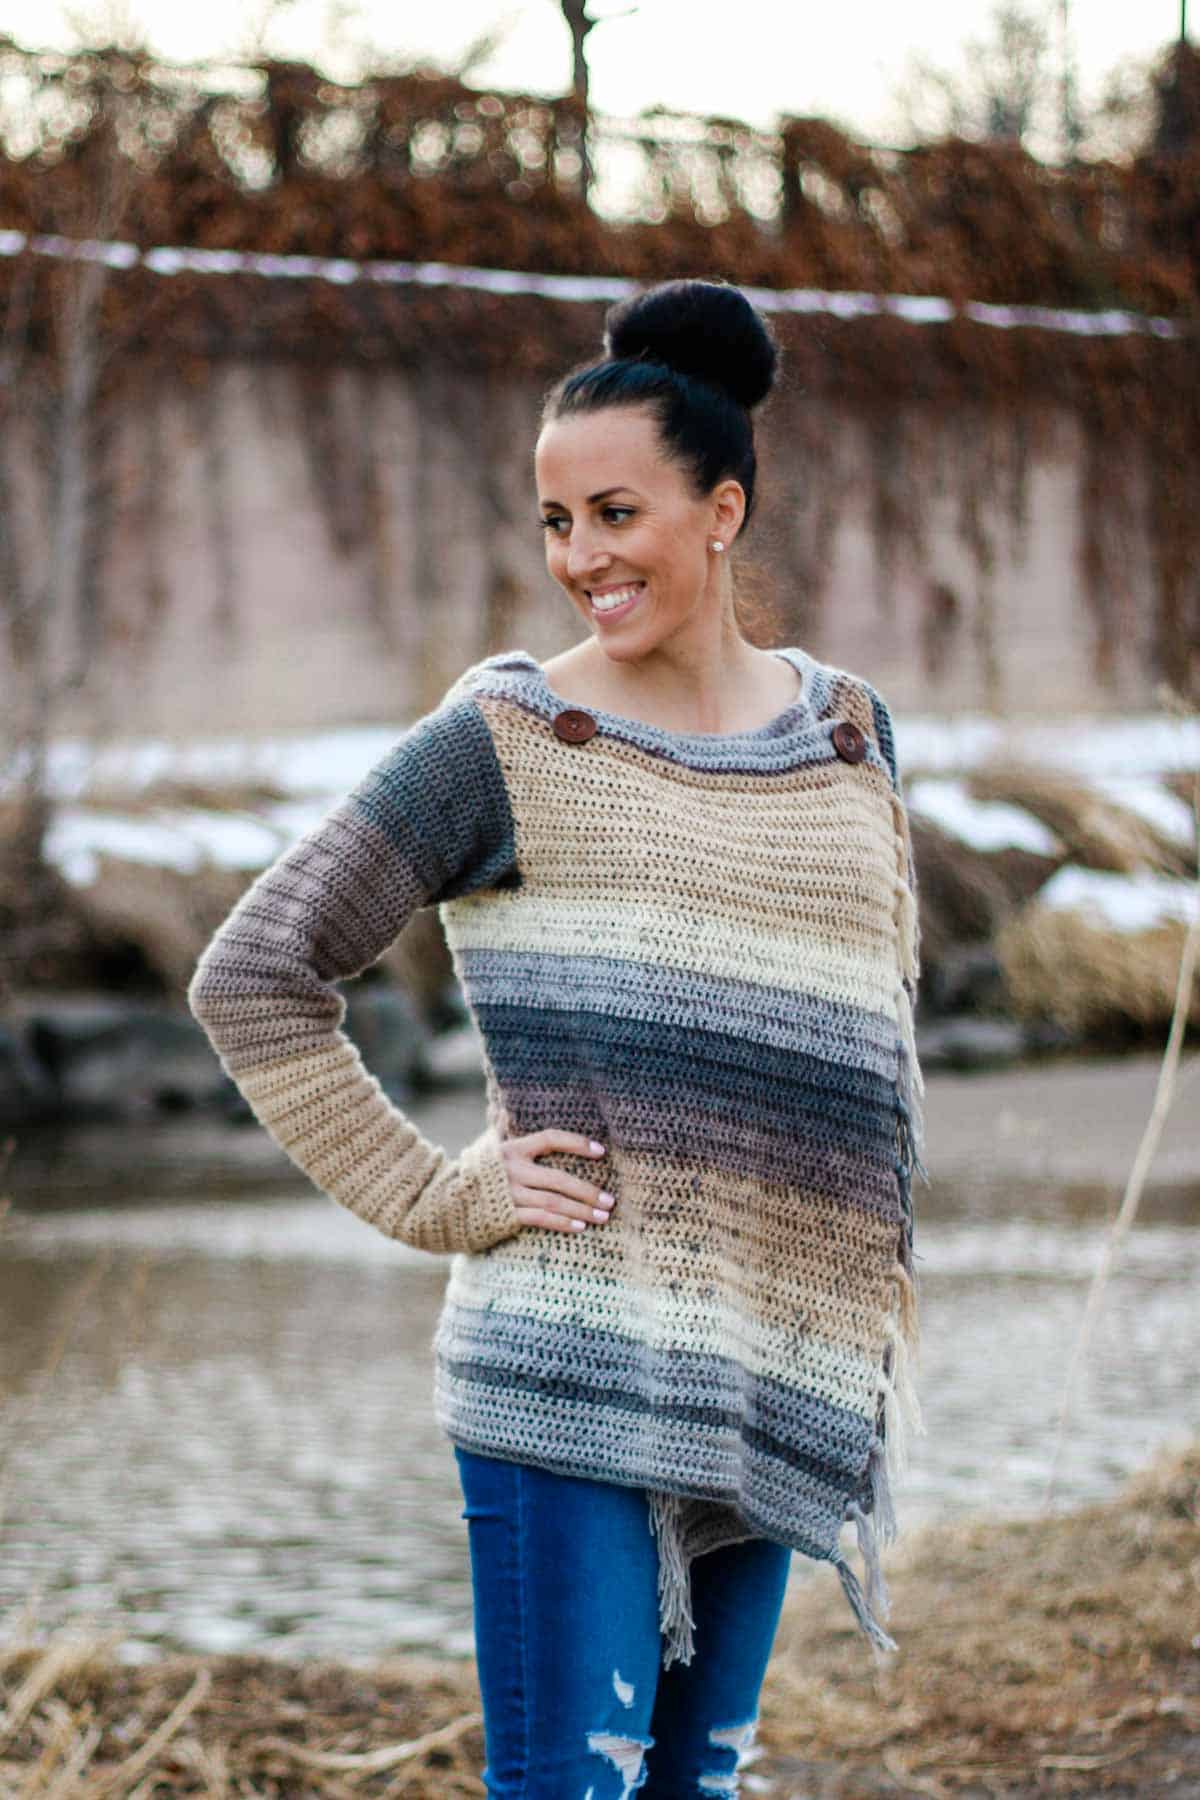 This crochet blanket sweater can button in front to create the look of a pullover or be worn open like a cardigan. Free pattern and tutorial.